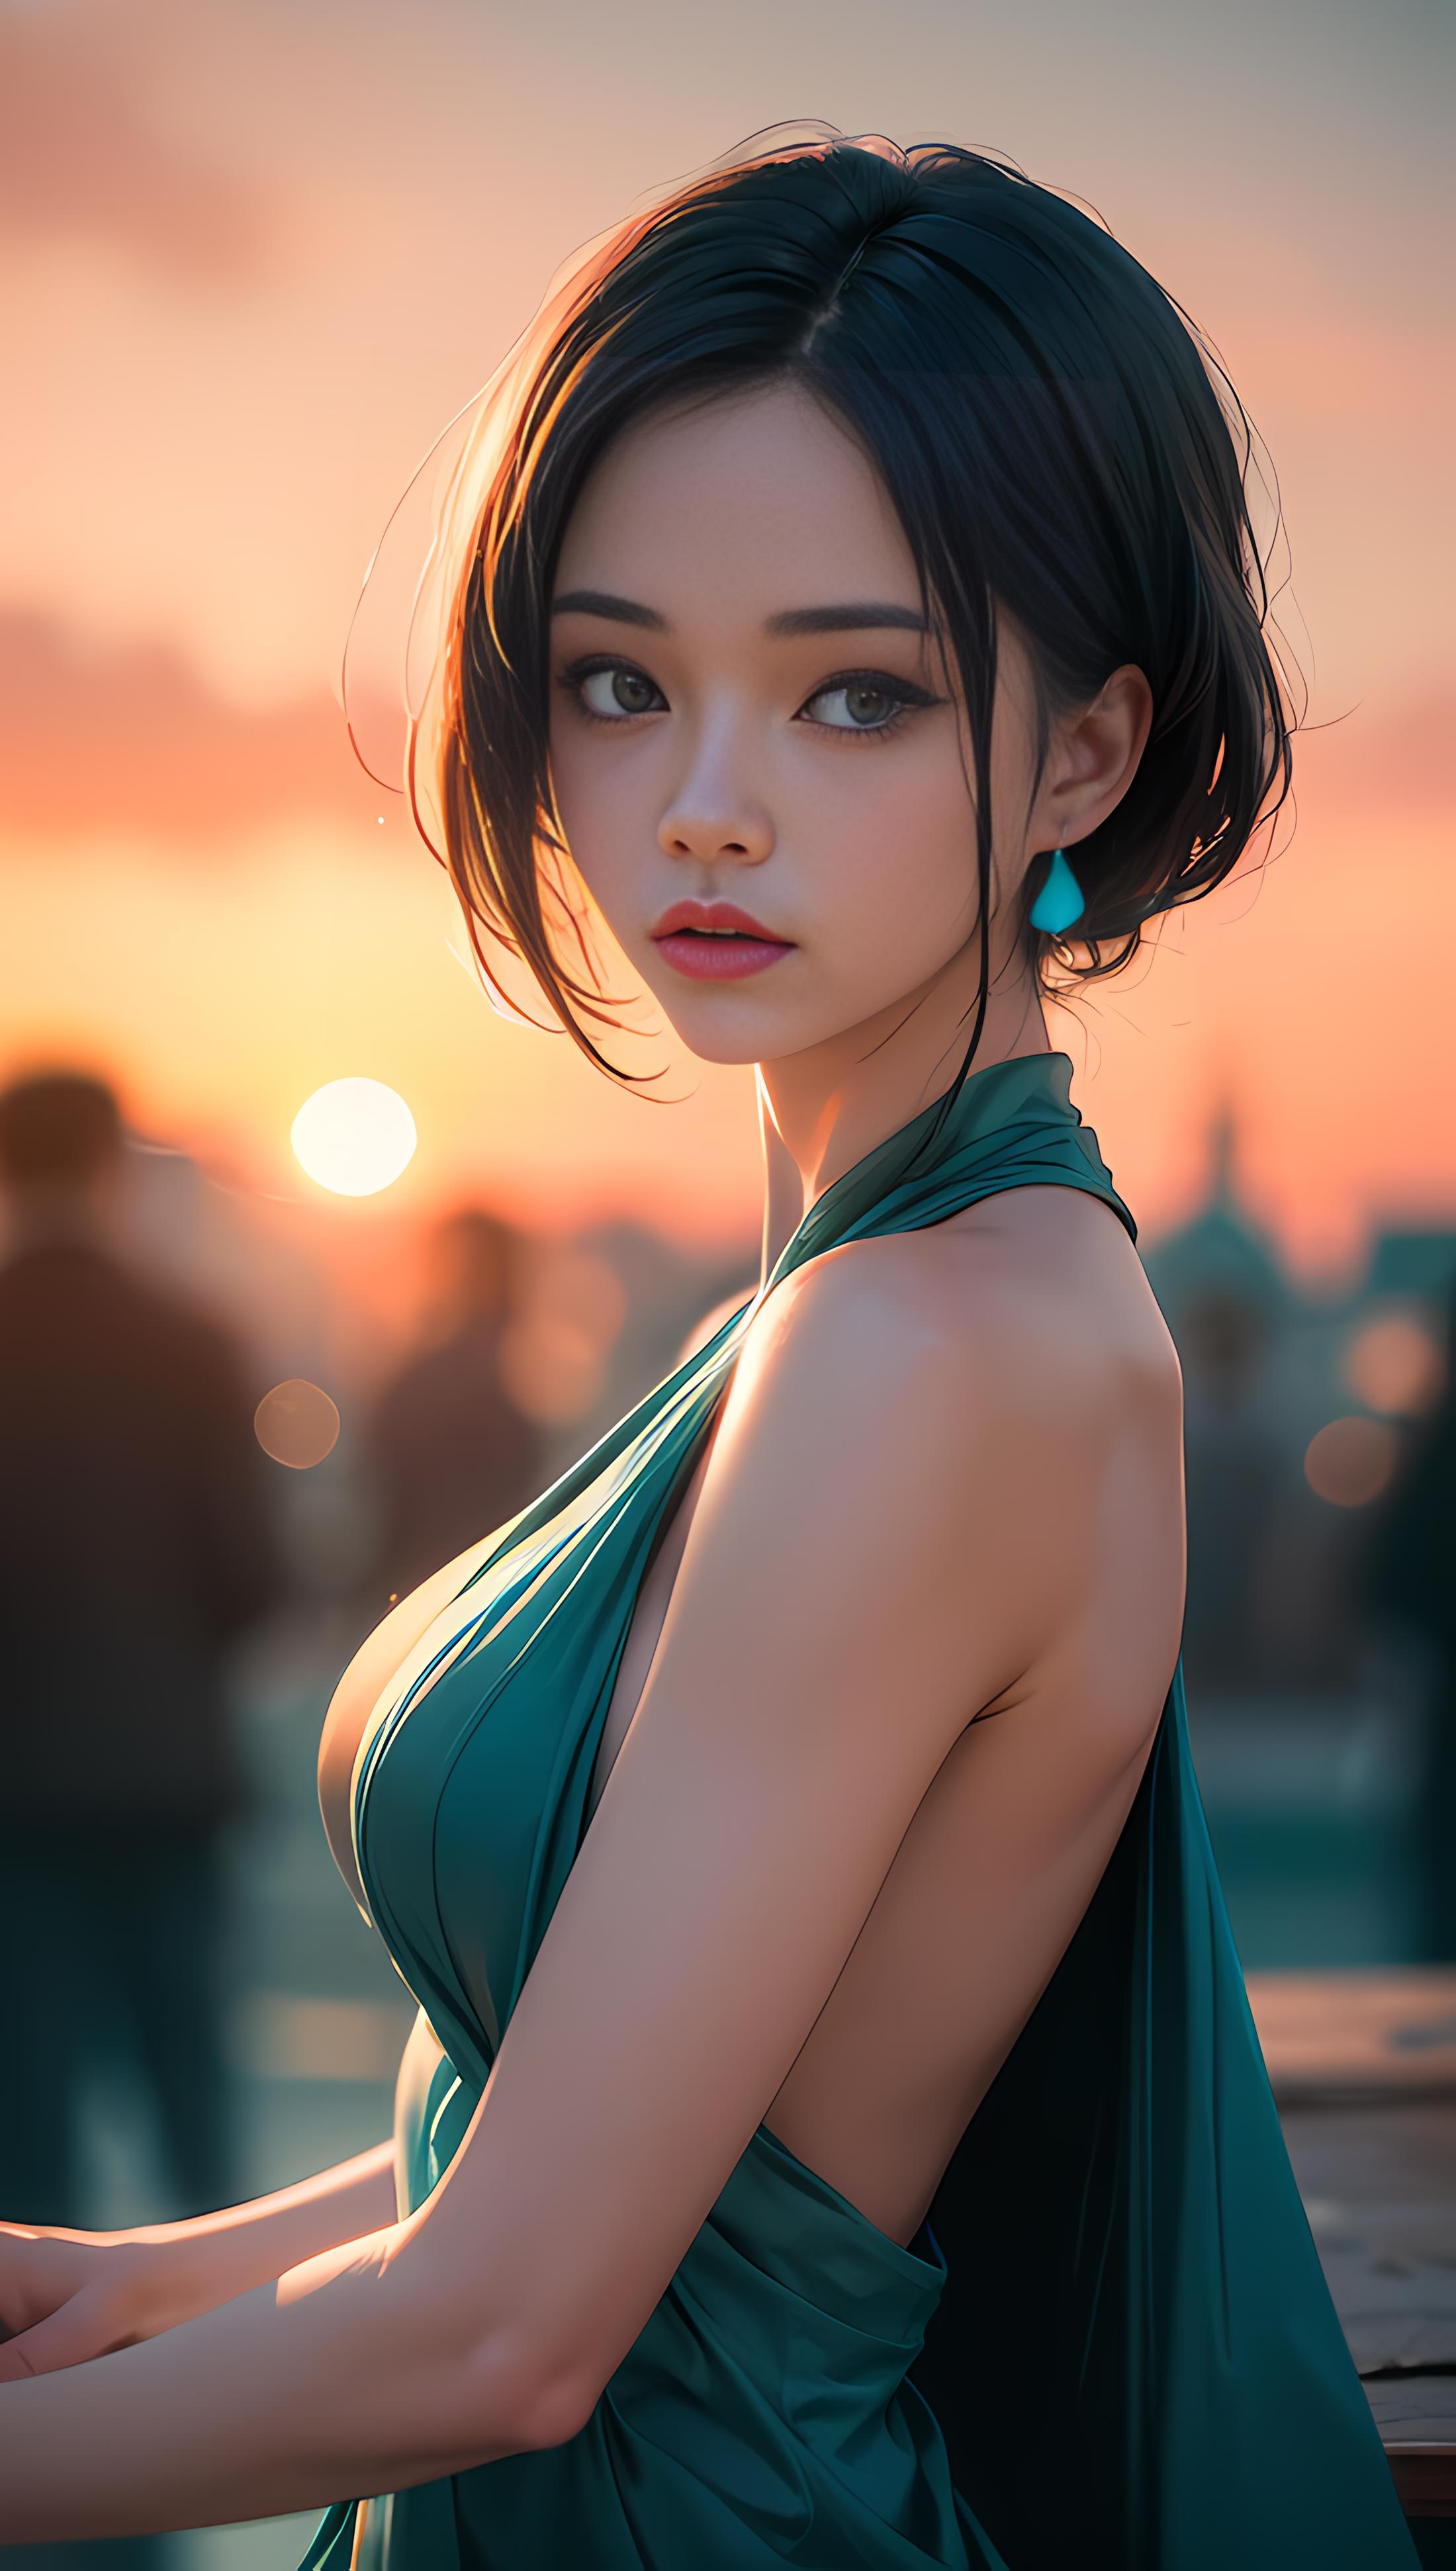 A beautiful young woman with long black hair and a green dress, posing for the camera.